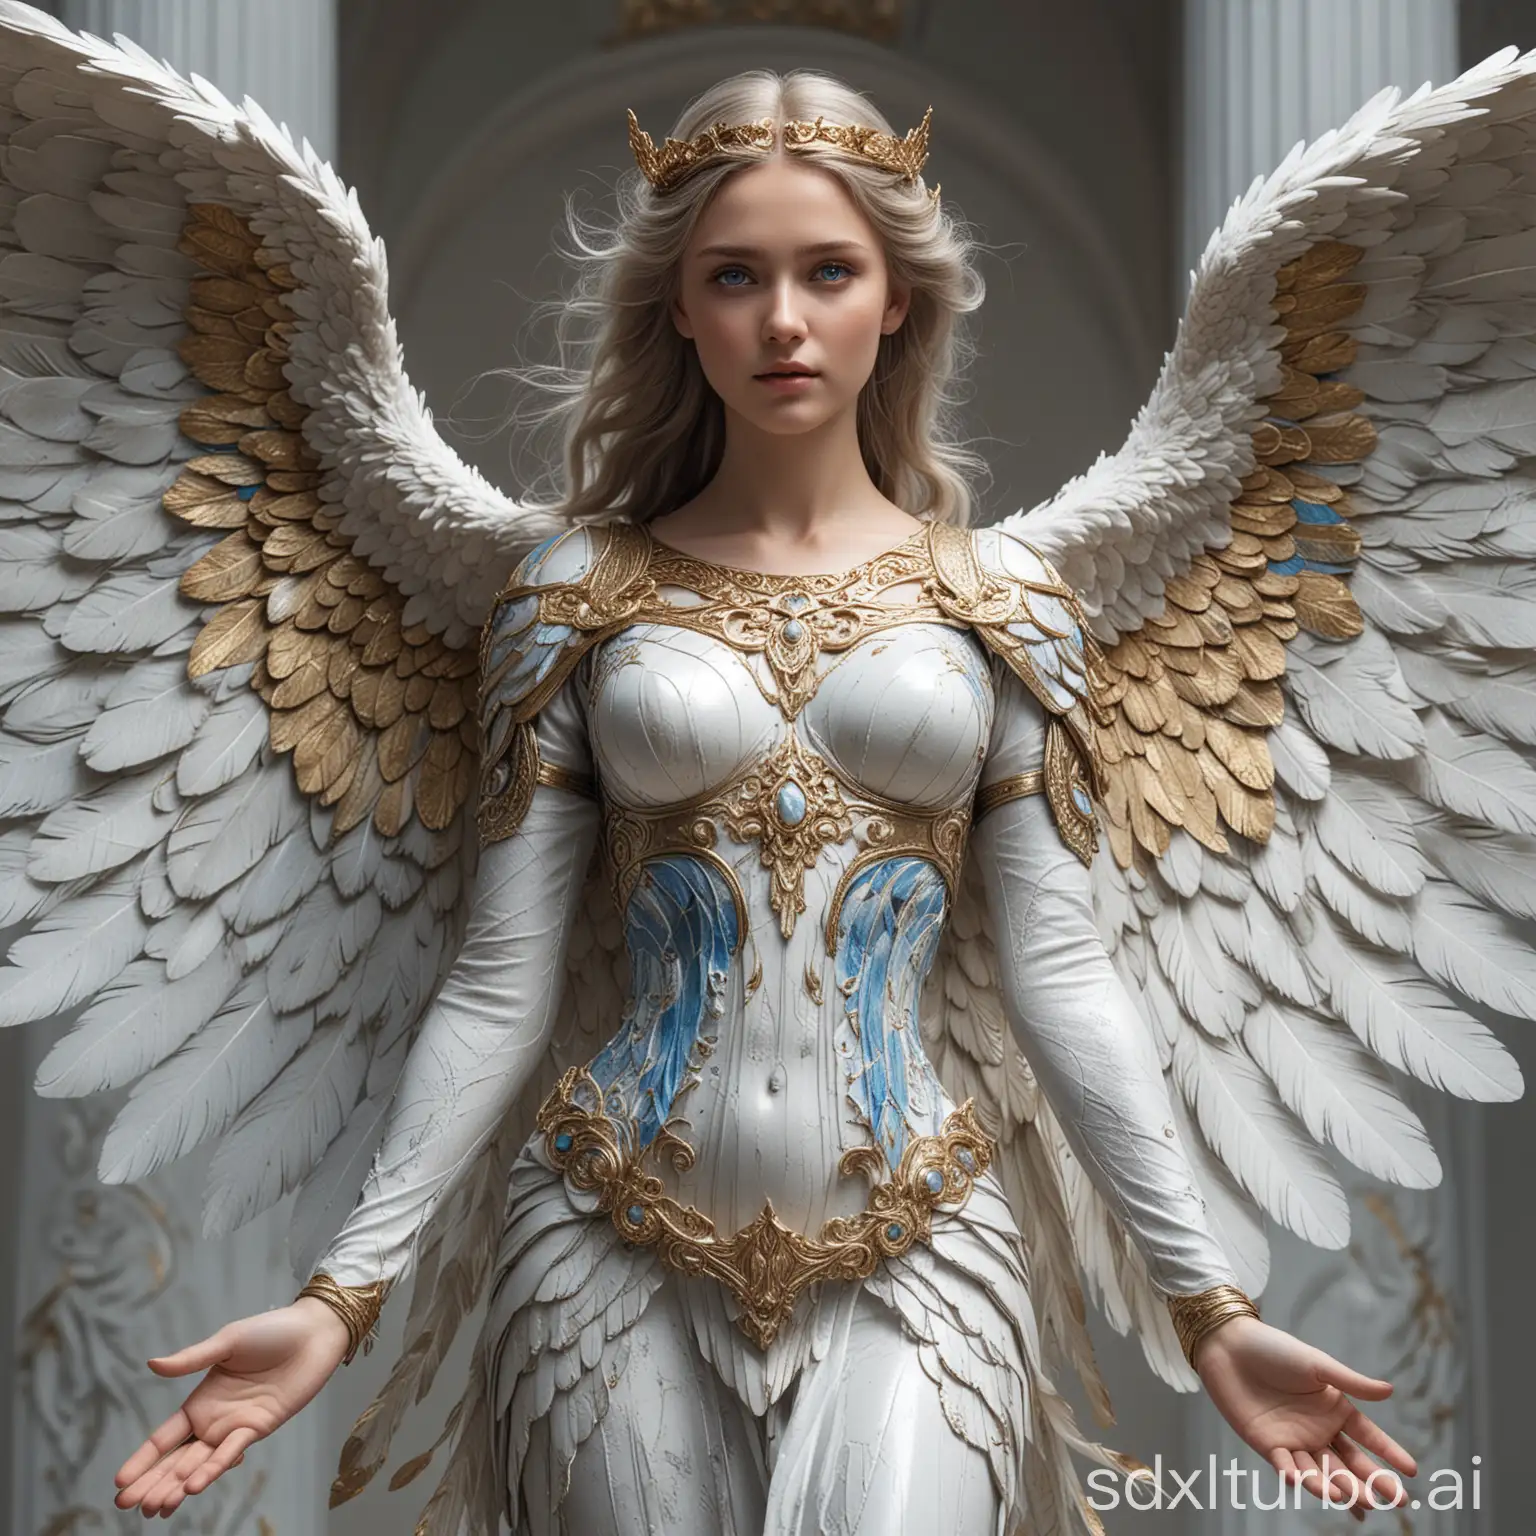 Stunning-Fantasy-Angel-Portrait-with-Spread-Wings-and-Intricate-Details